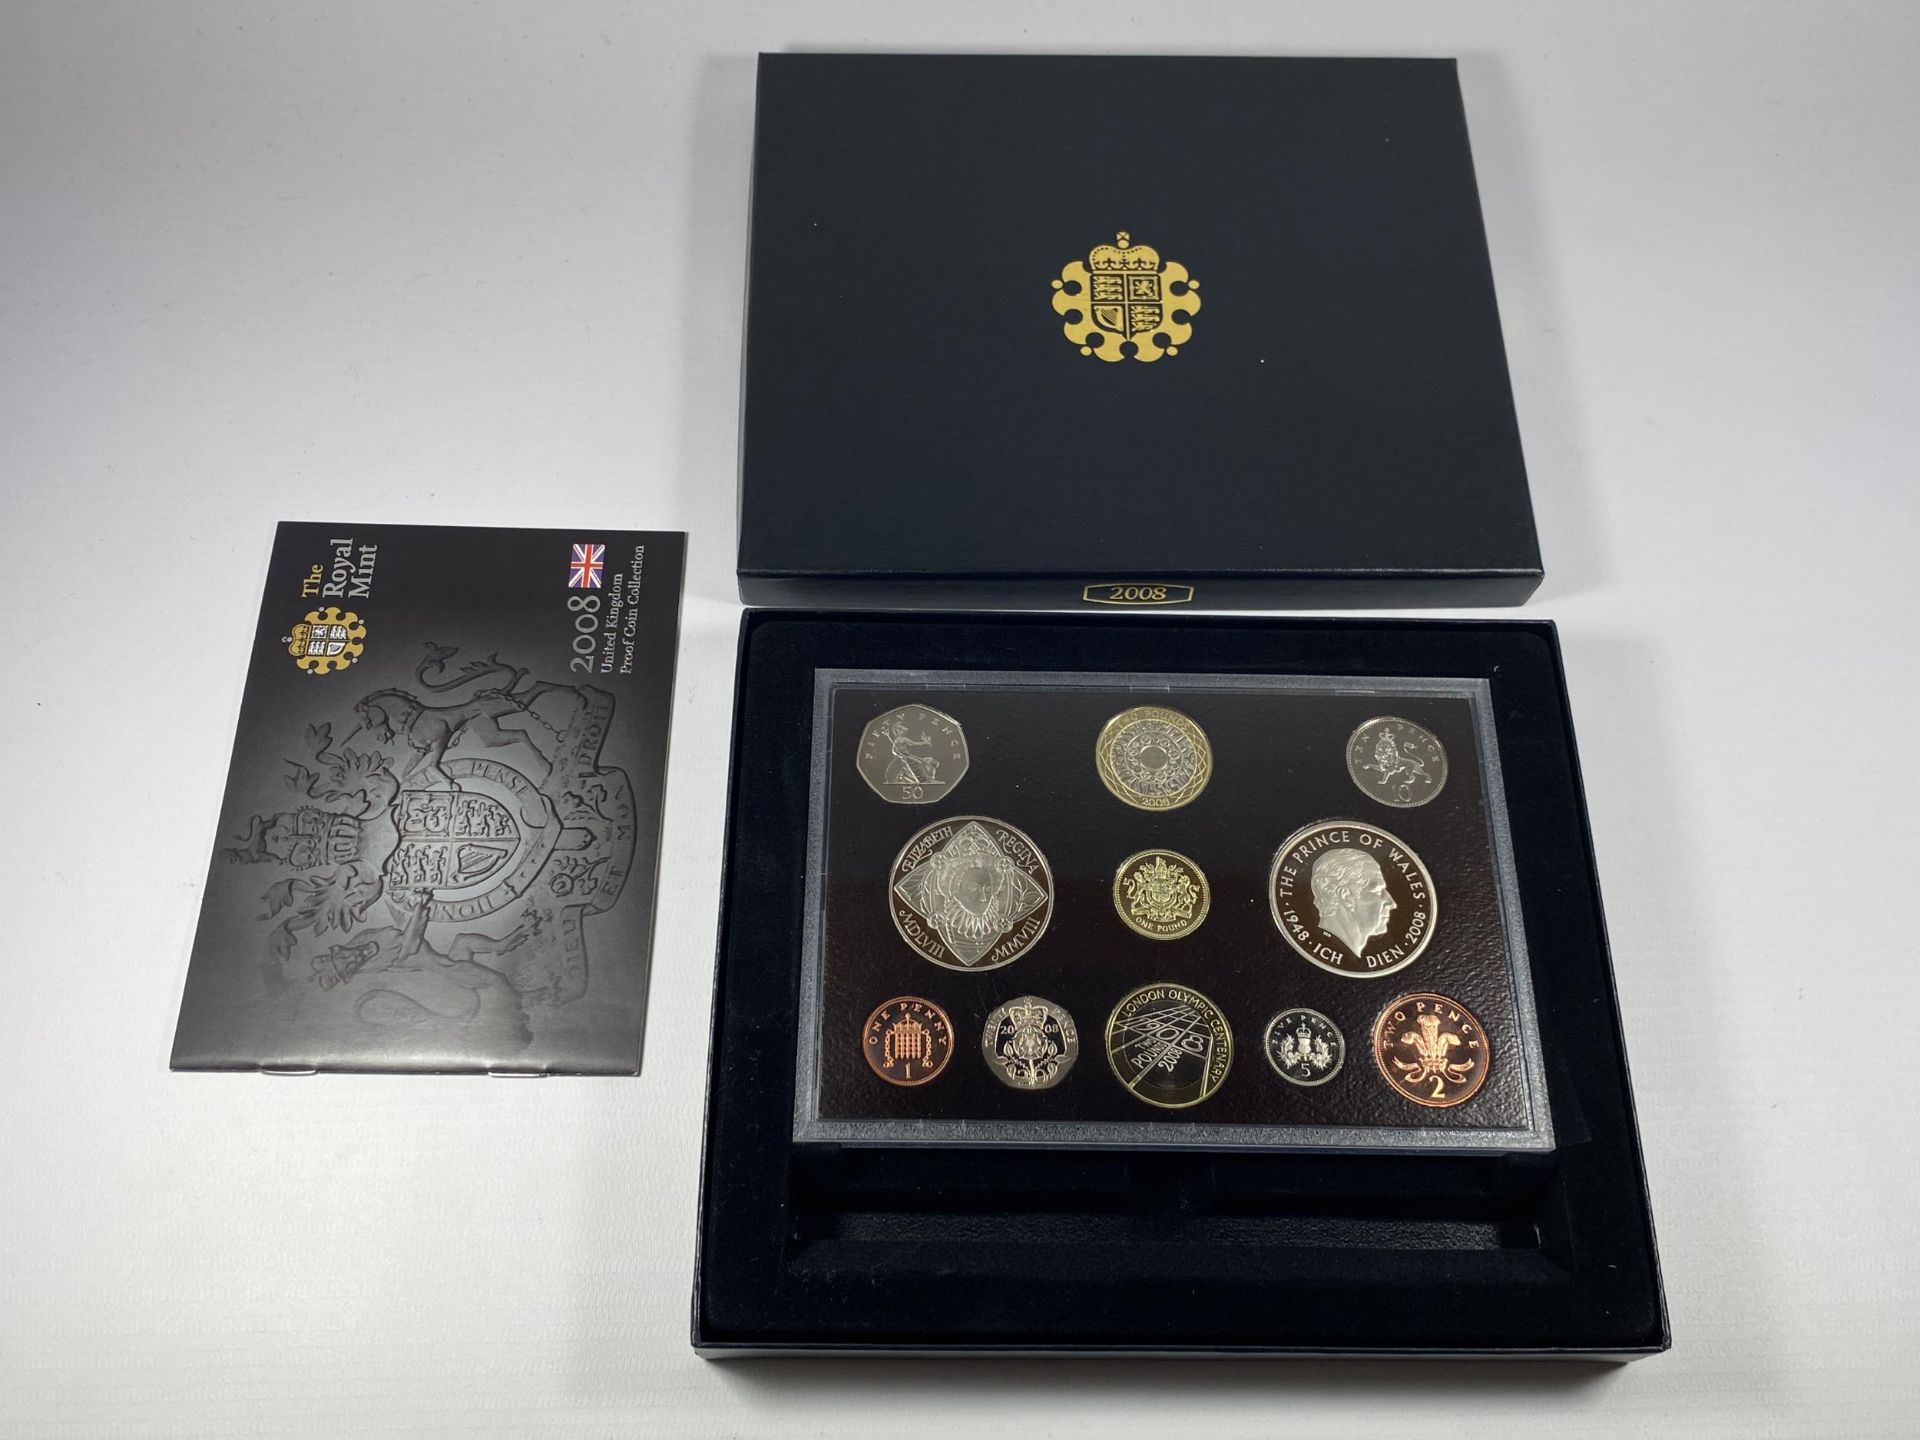 A 2008 ROYAL MINT CASED PROOF COIN SET